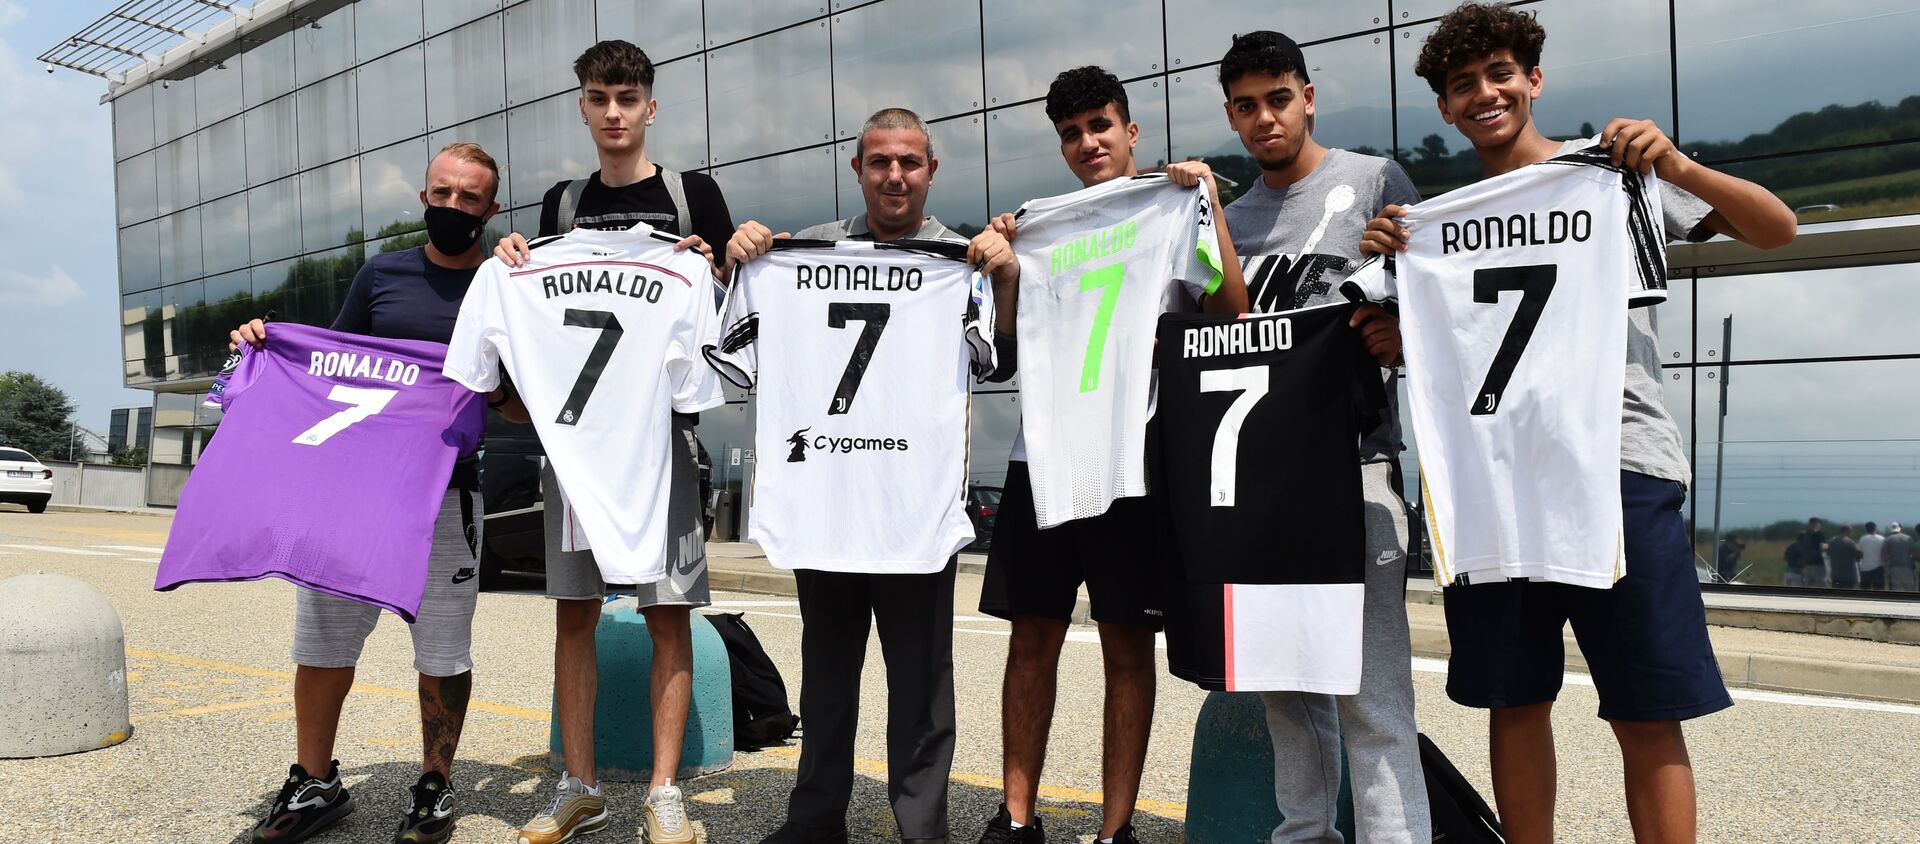  Turin-Caselle Airport, Turin, Italy - July 25, 2021 Juventus' fans display shirts with Cristiano Ronaldo's name outside Turin-Caselle Airport before he arrives - Sputnik International, 1920, 25.07.2021